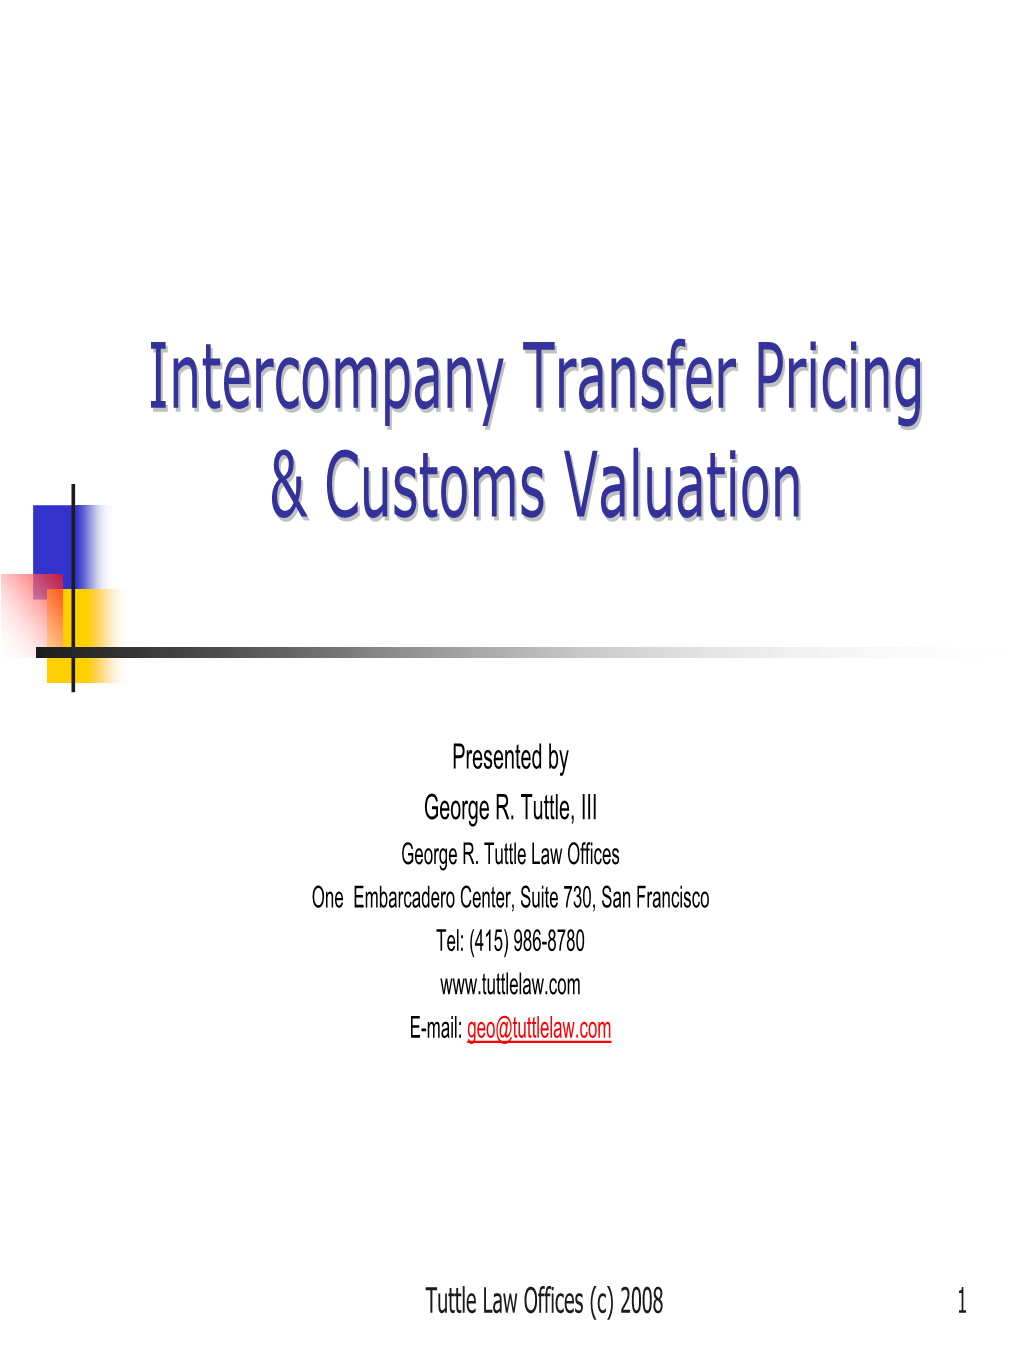 Effect of Intercompany Transfer Pricing on Customs Transactions